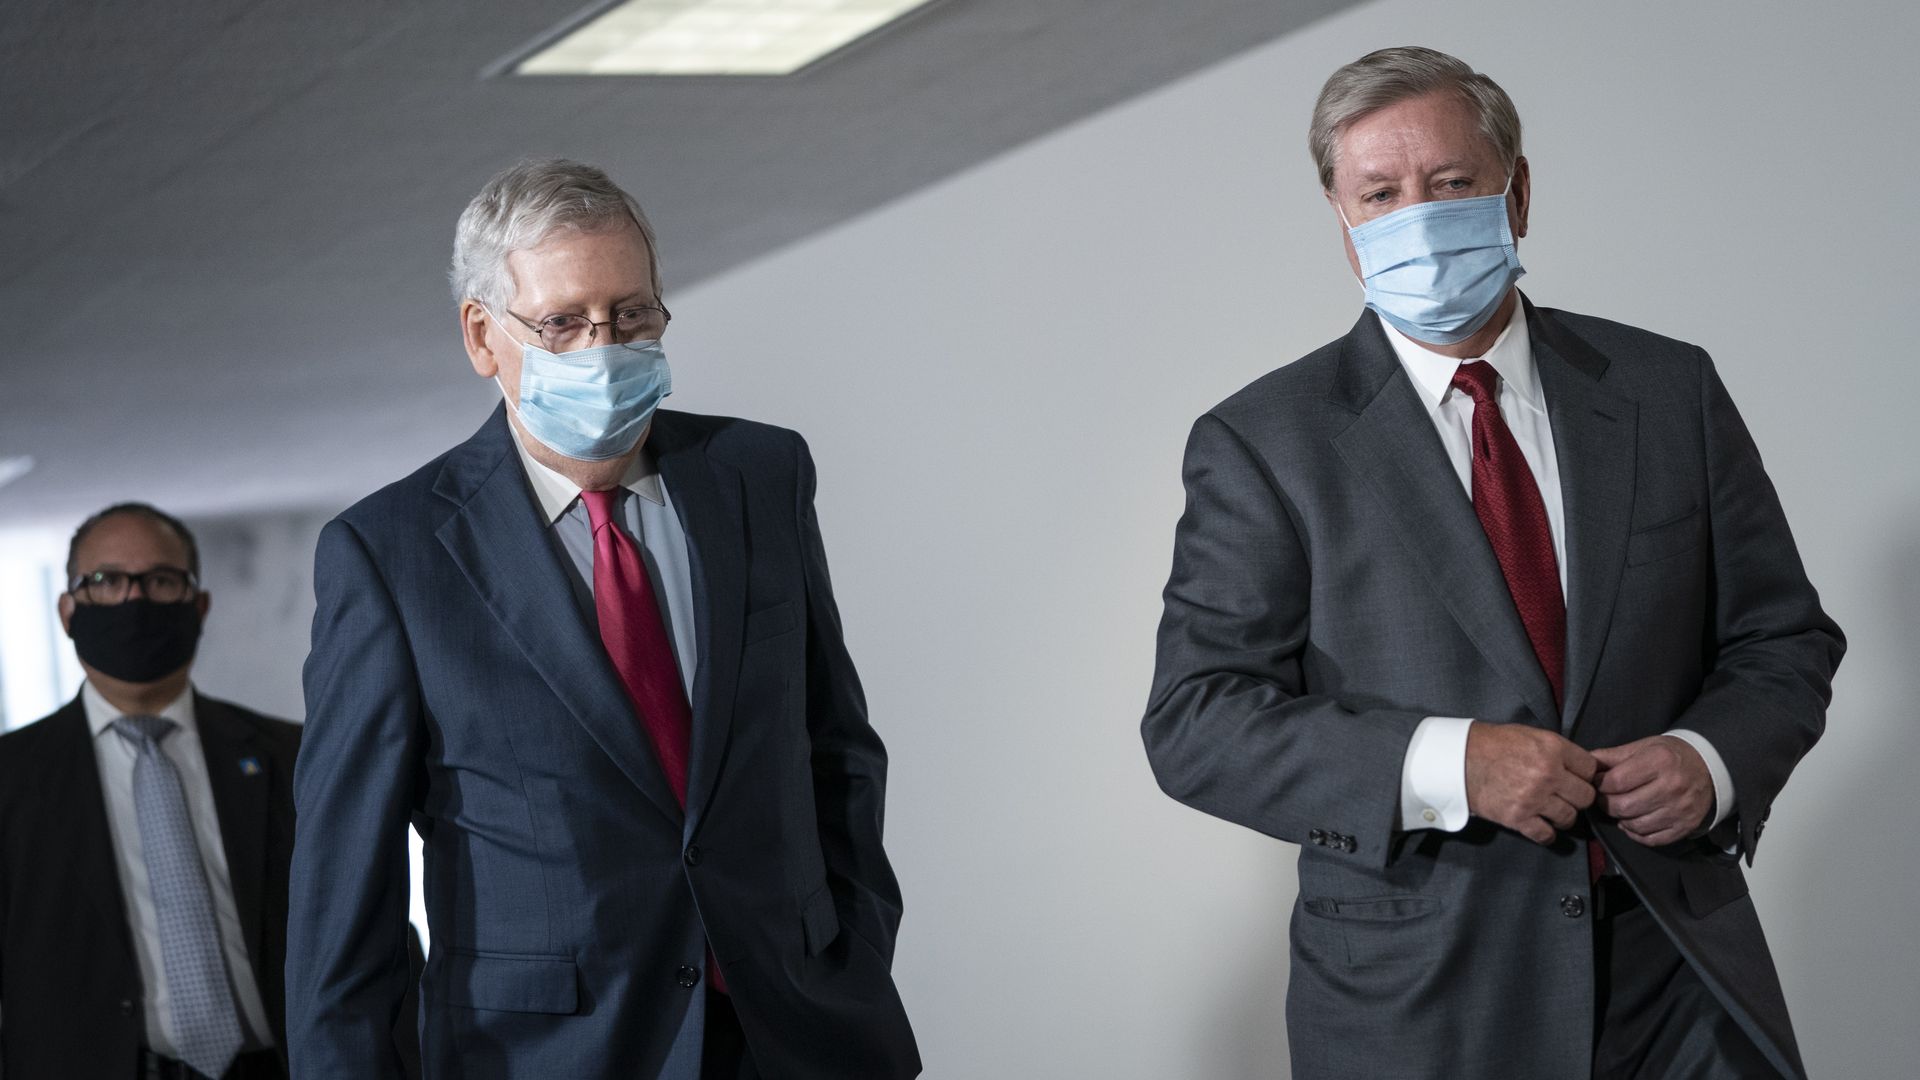 Mitch McConnell and Lindsey Graham wearing face masks